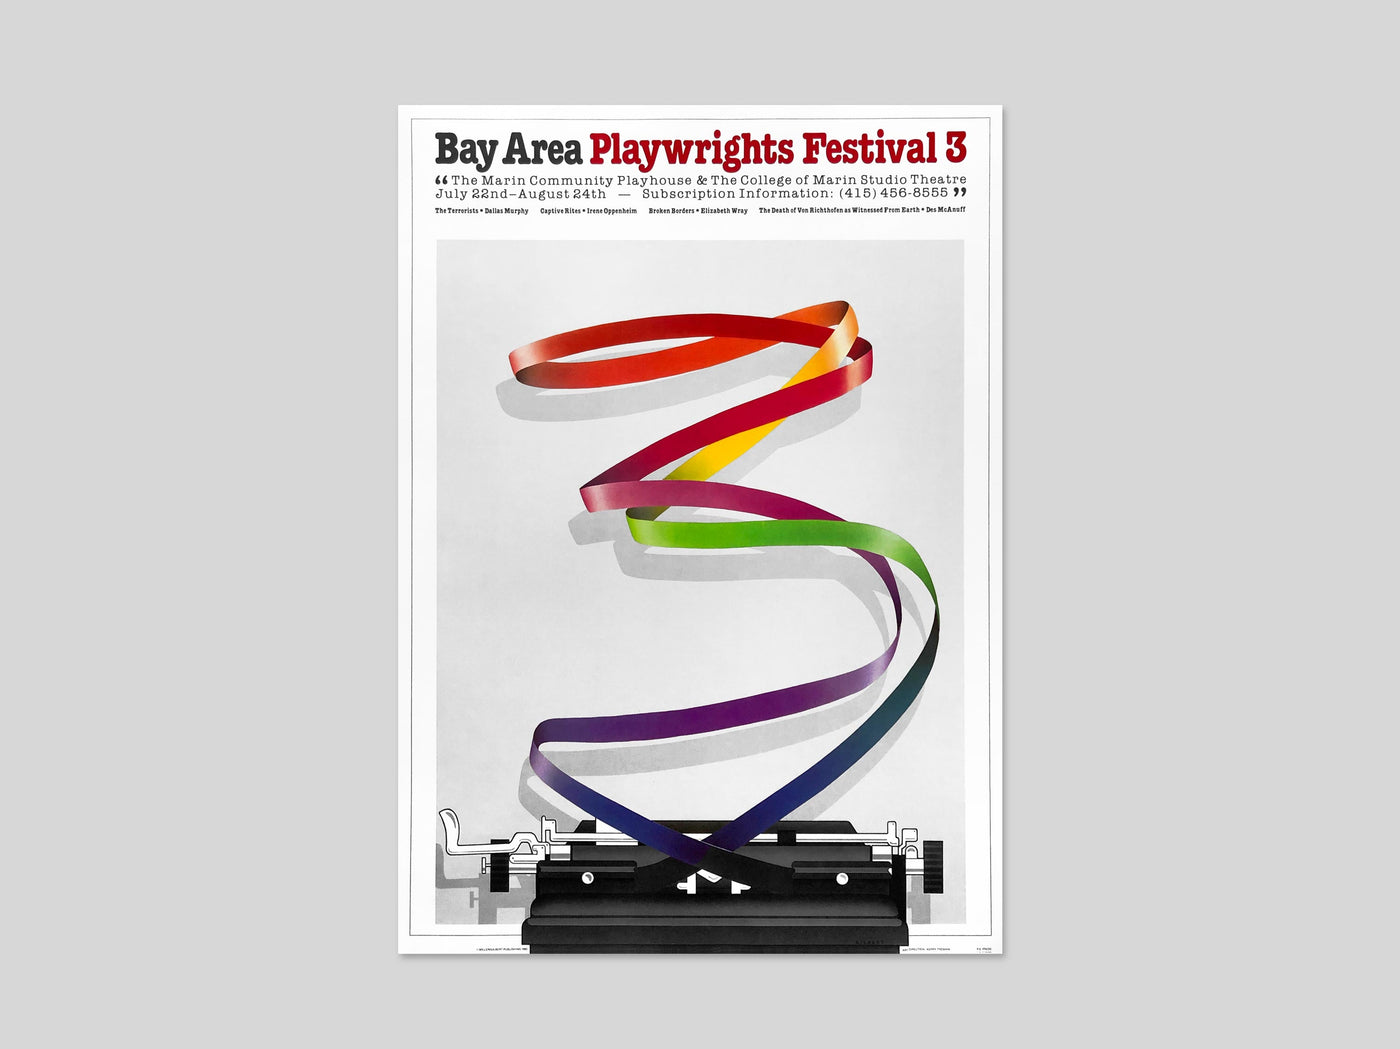 Bay Area Playwrights Festival 3 Poster - by Dan Gilbert